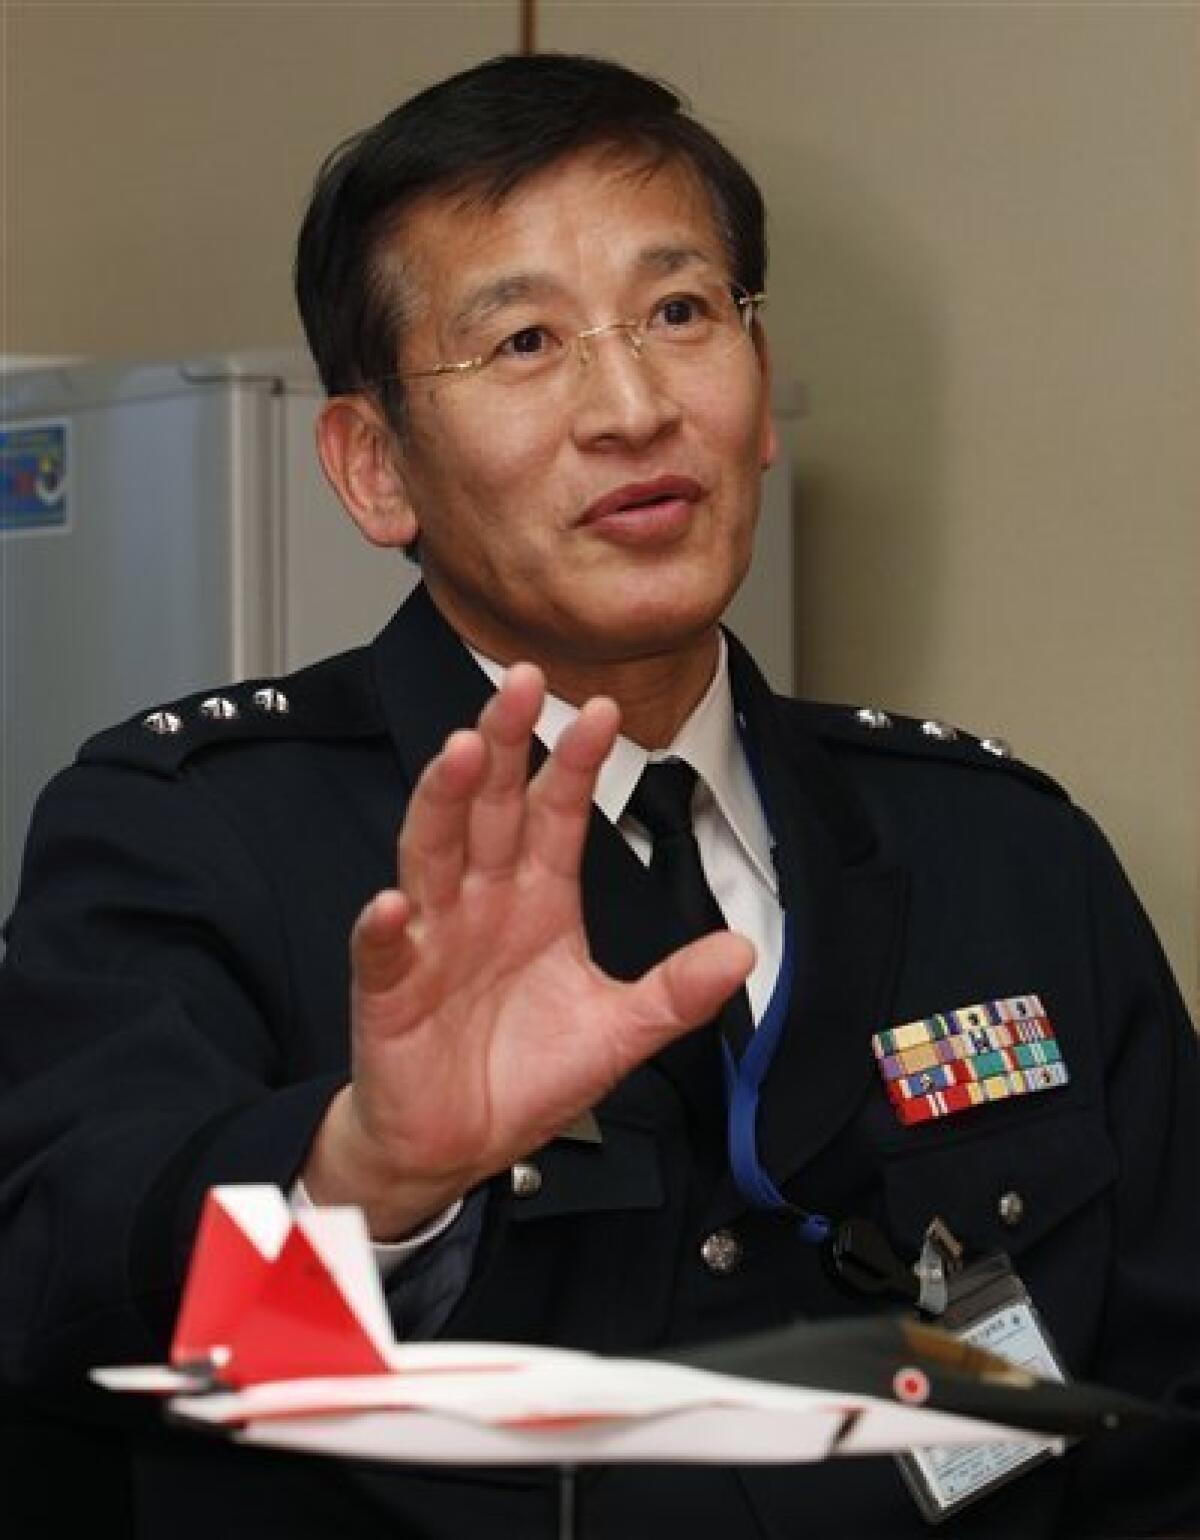 In this March 7, 2011 photo, Lt. General Hideyuki Yoshioka speaks during an interview with The Associated Press at Defense Ministry in Tokyo. Yoshioka, the director of the air systems development at the ministry, said Japan is on track to test a domestically designed prototype stealth fighter in three years. The fighter model is shown in the foreground. (AP Photo/Shizuo Kambayashi)